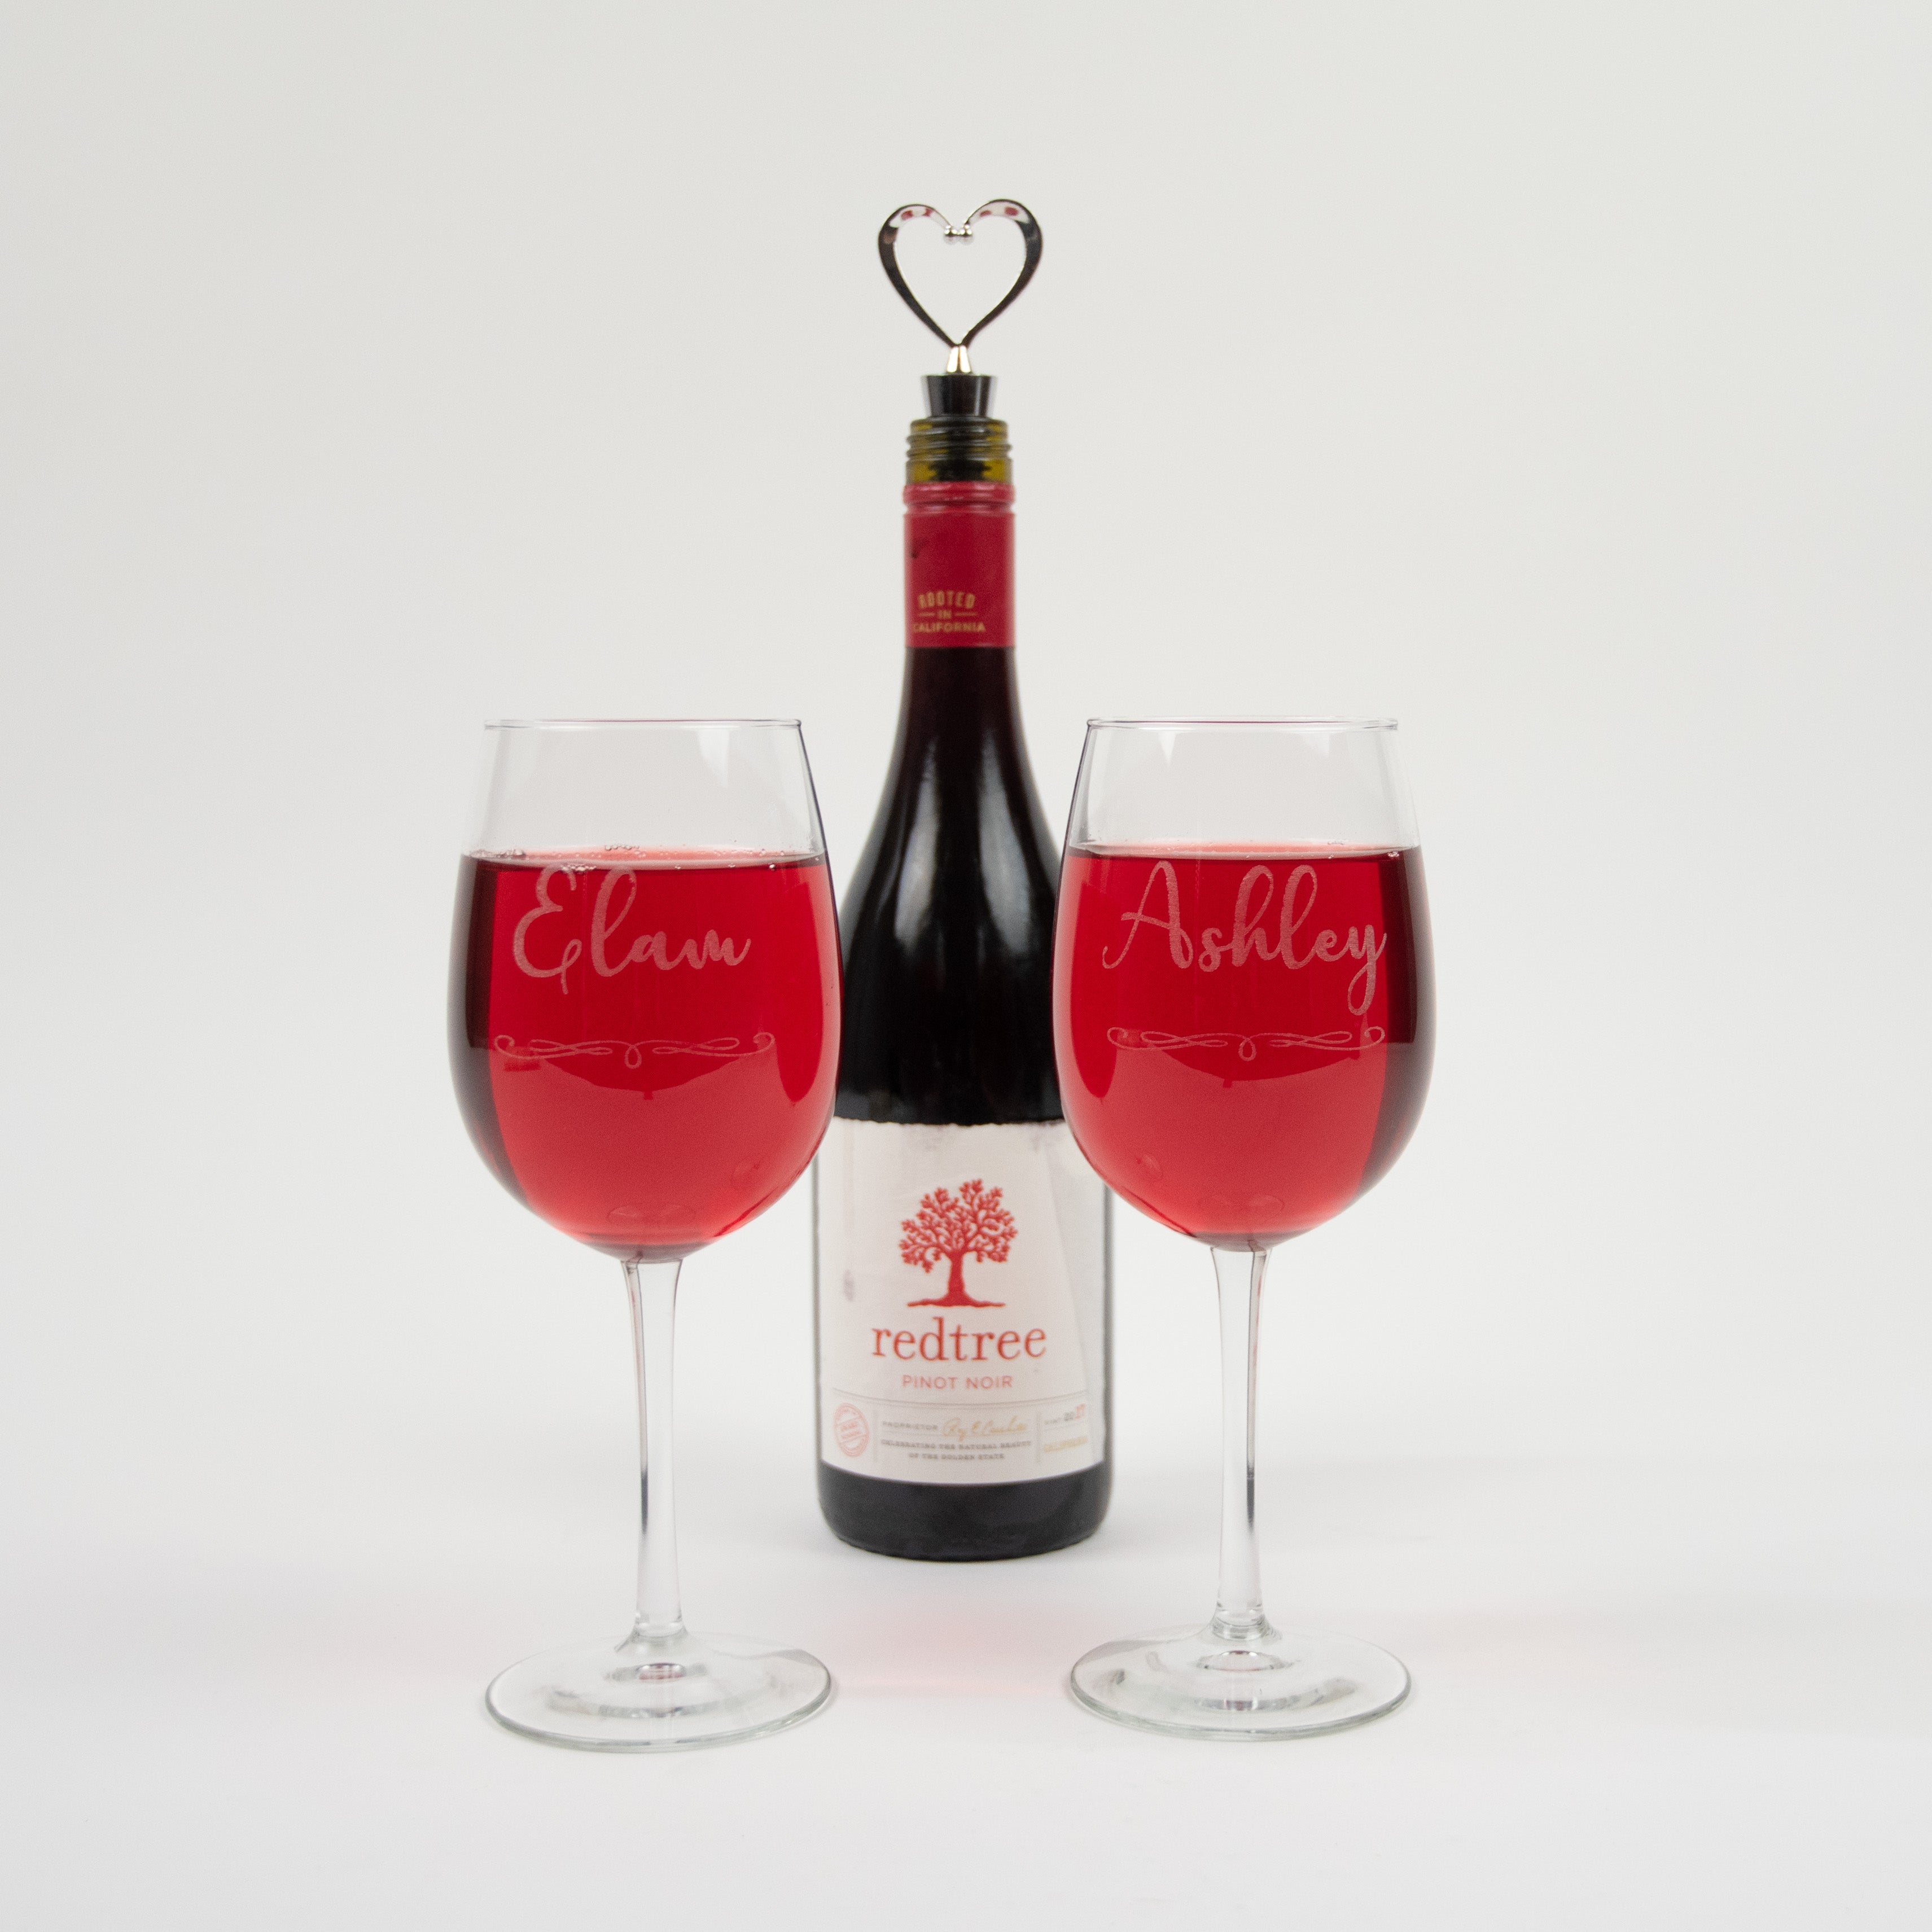 Personalized Wedding Wine Glasses set of TWO Custom Engraved 